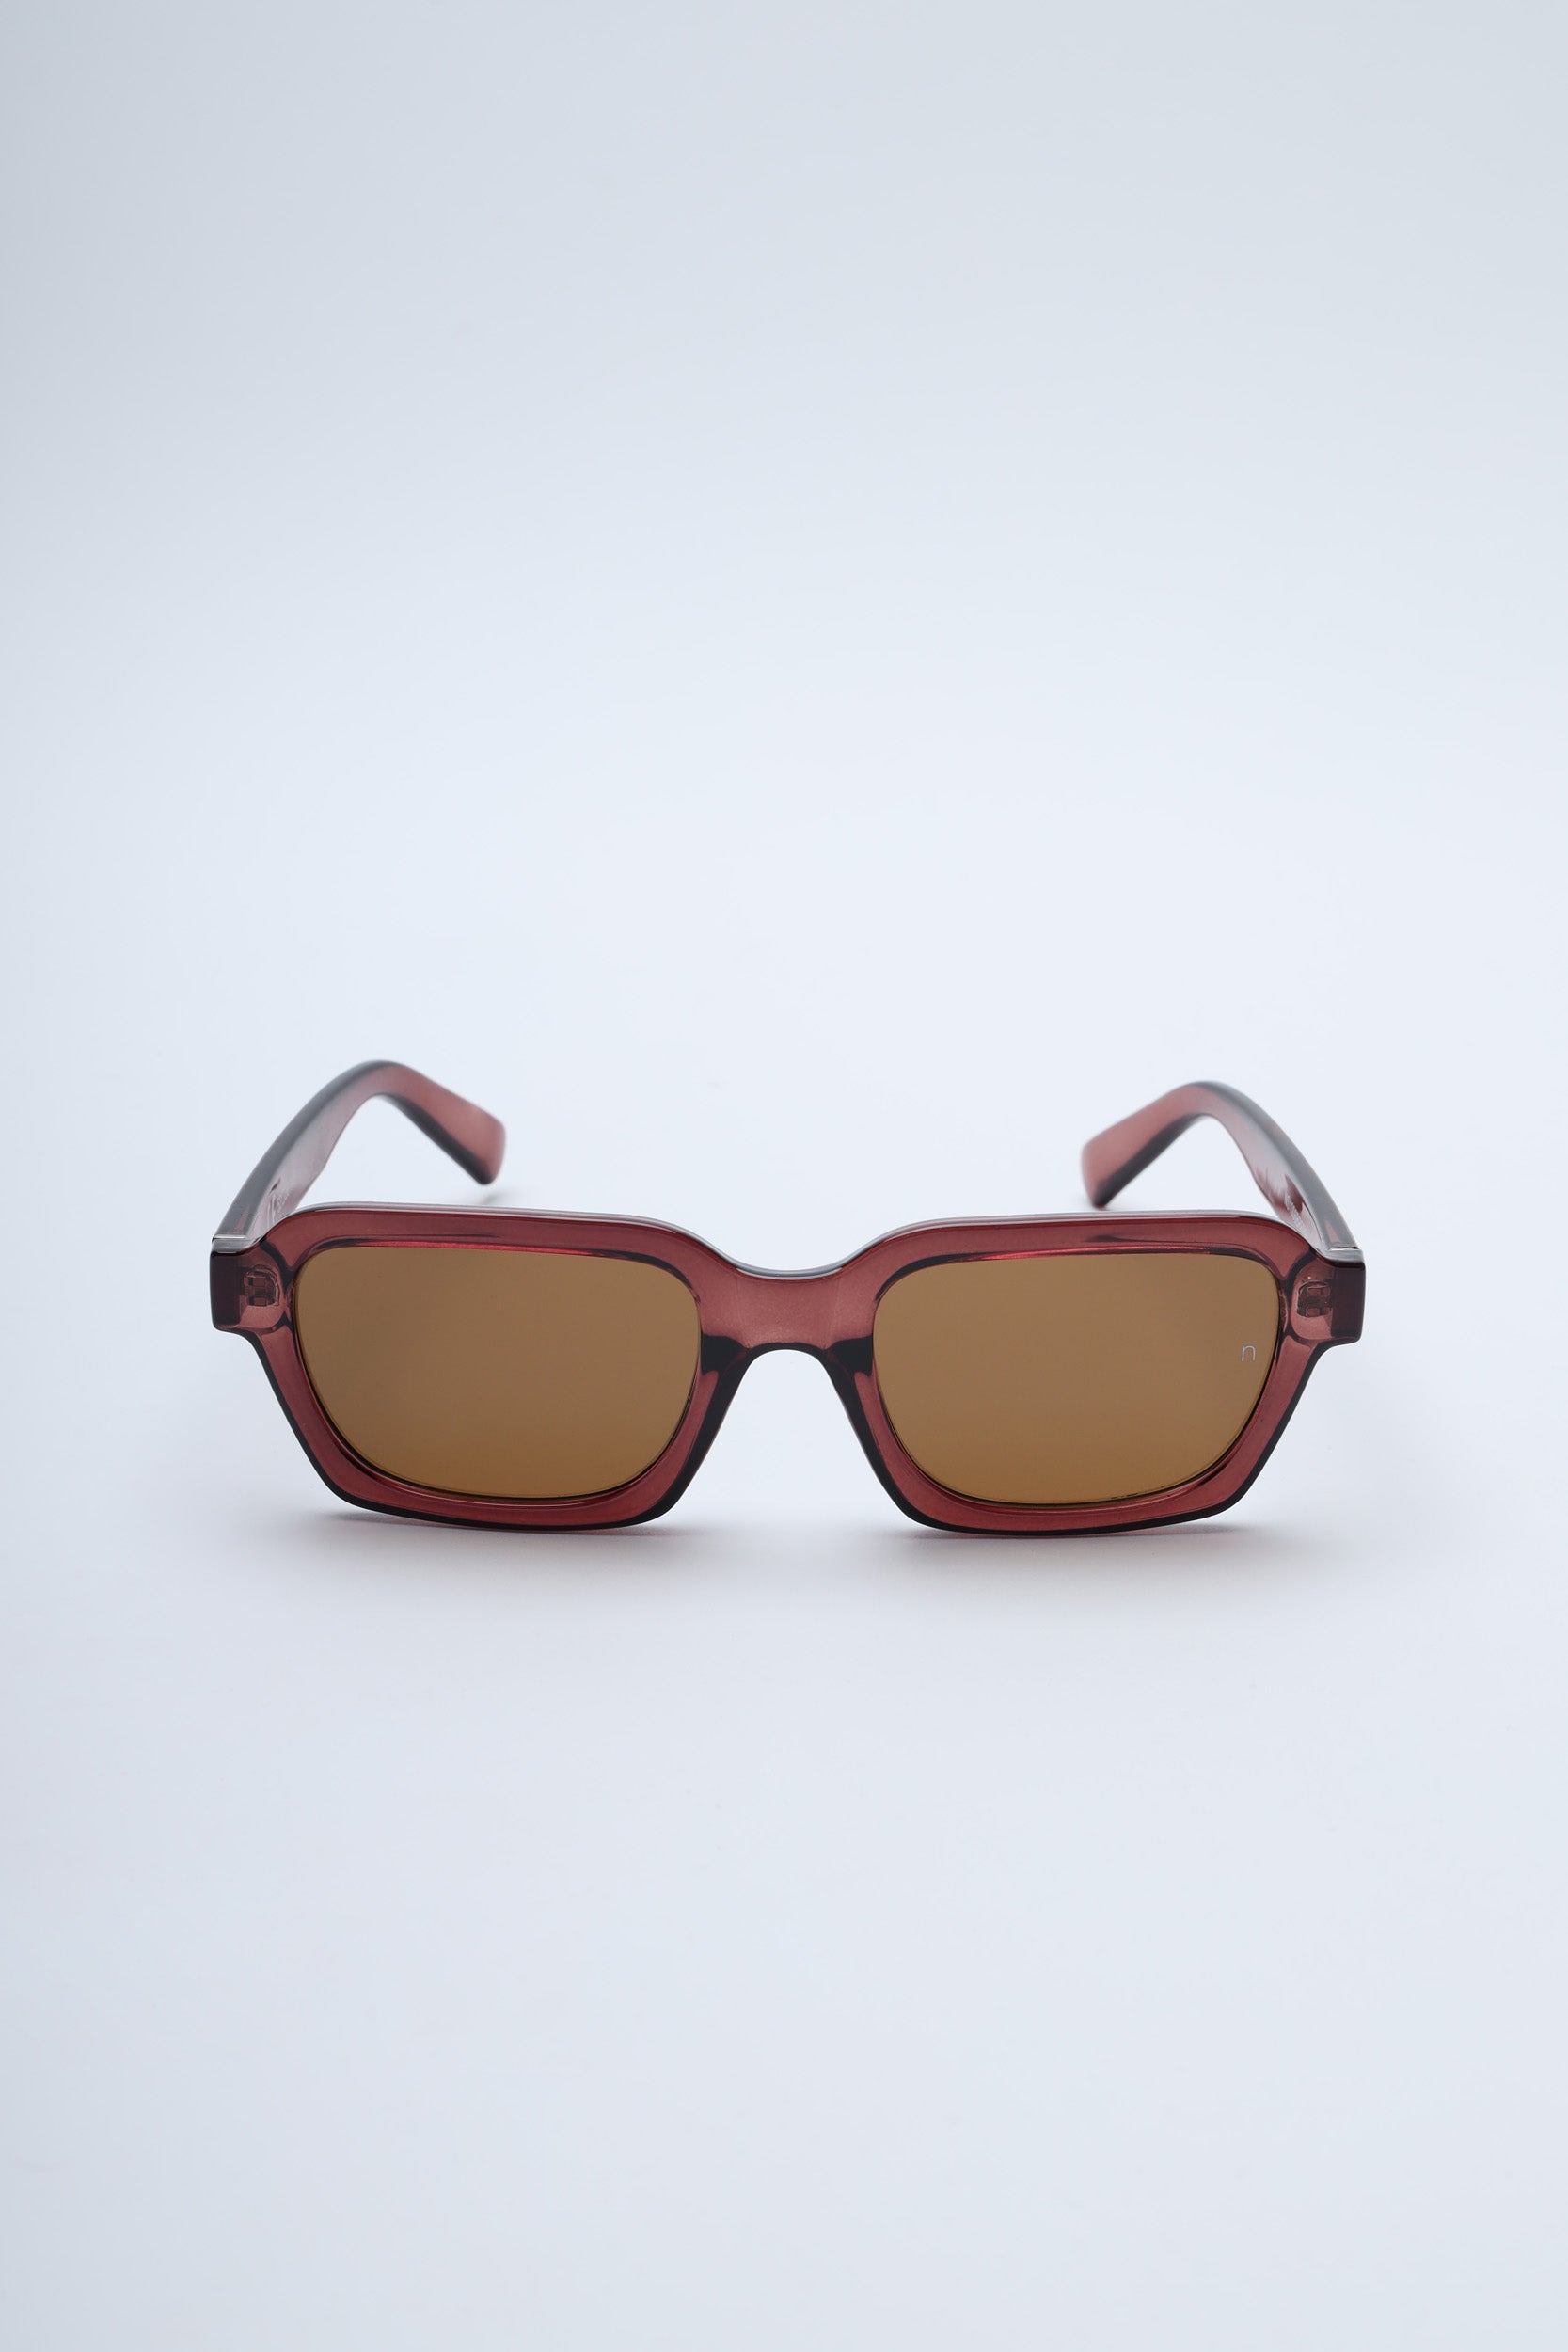 Sunglass Hut Collection HU1009 49 Gradient Brown & Shiny Copper